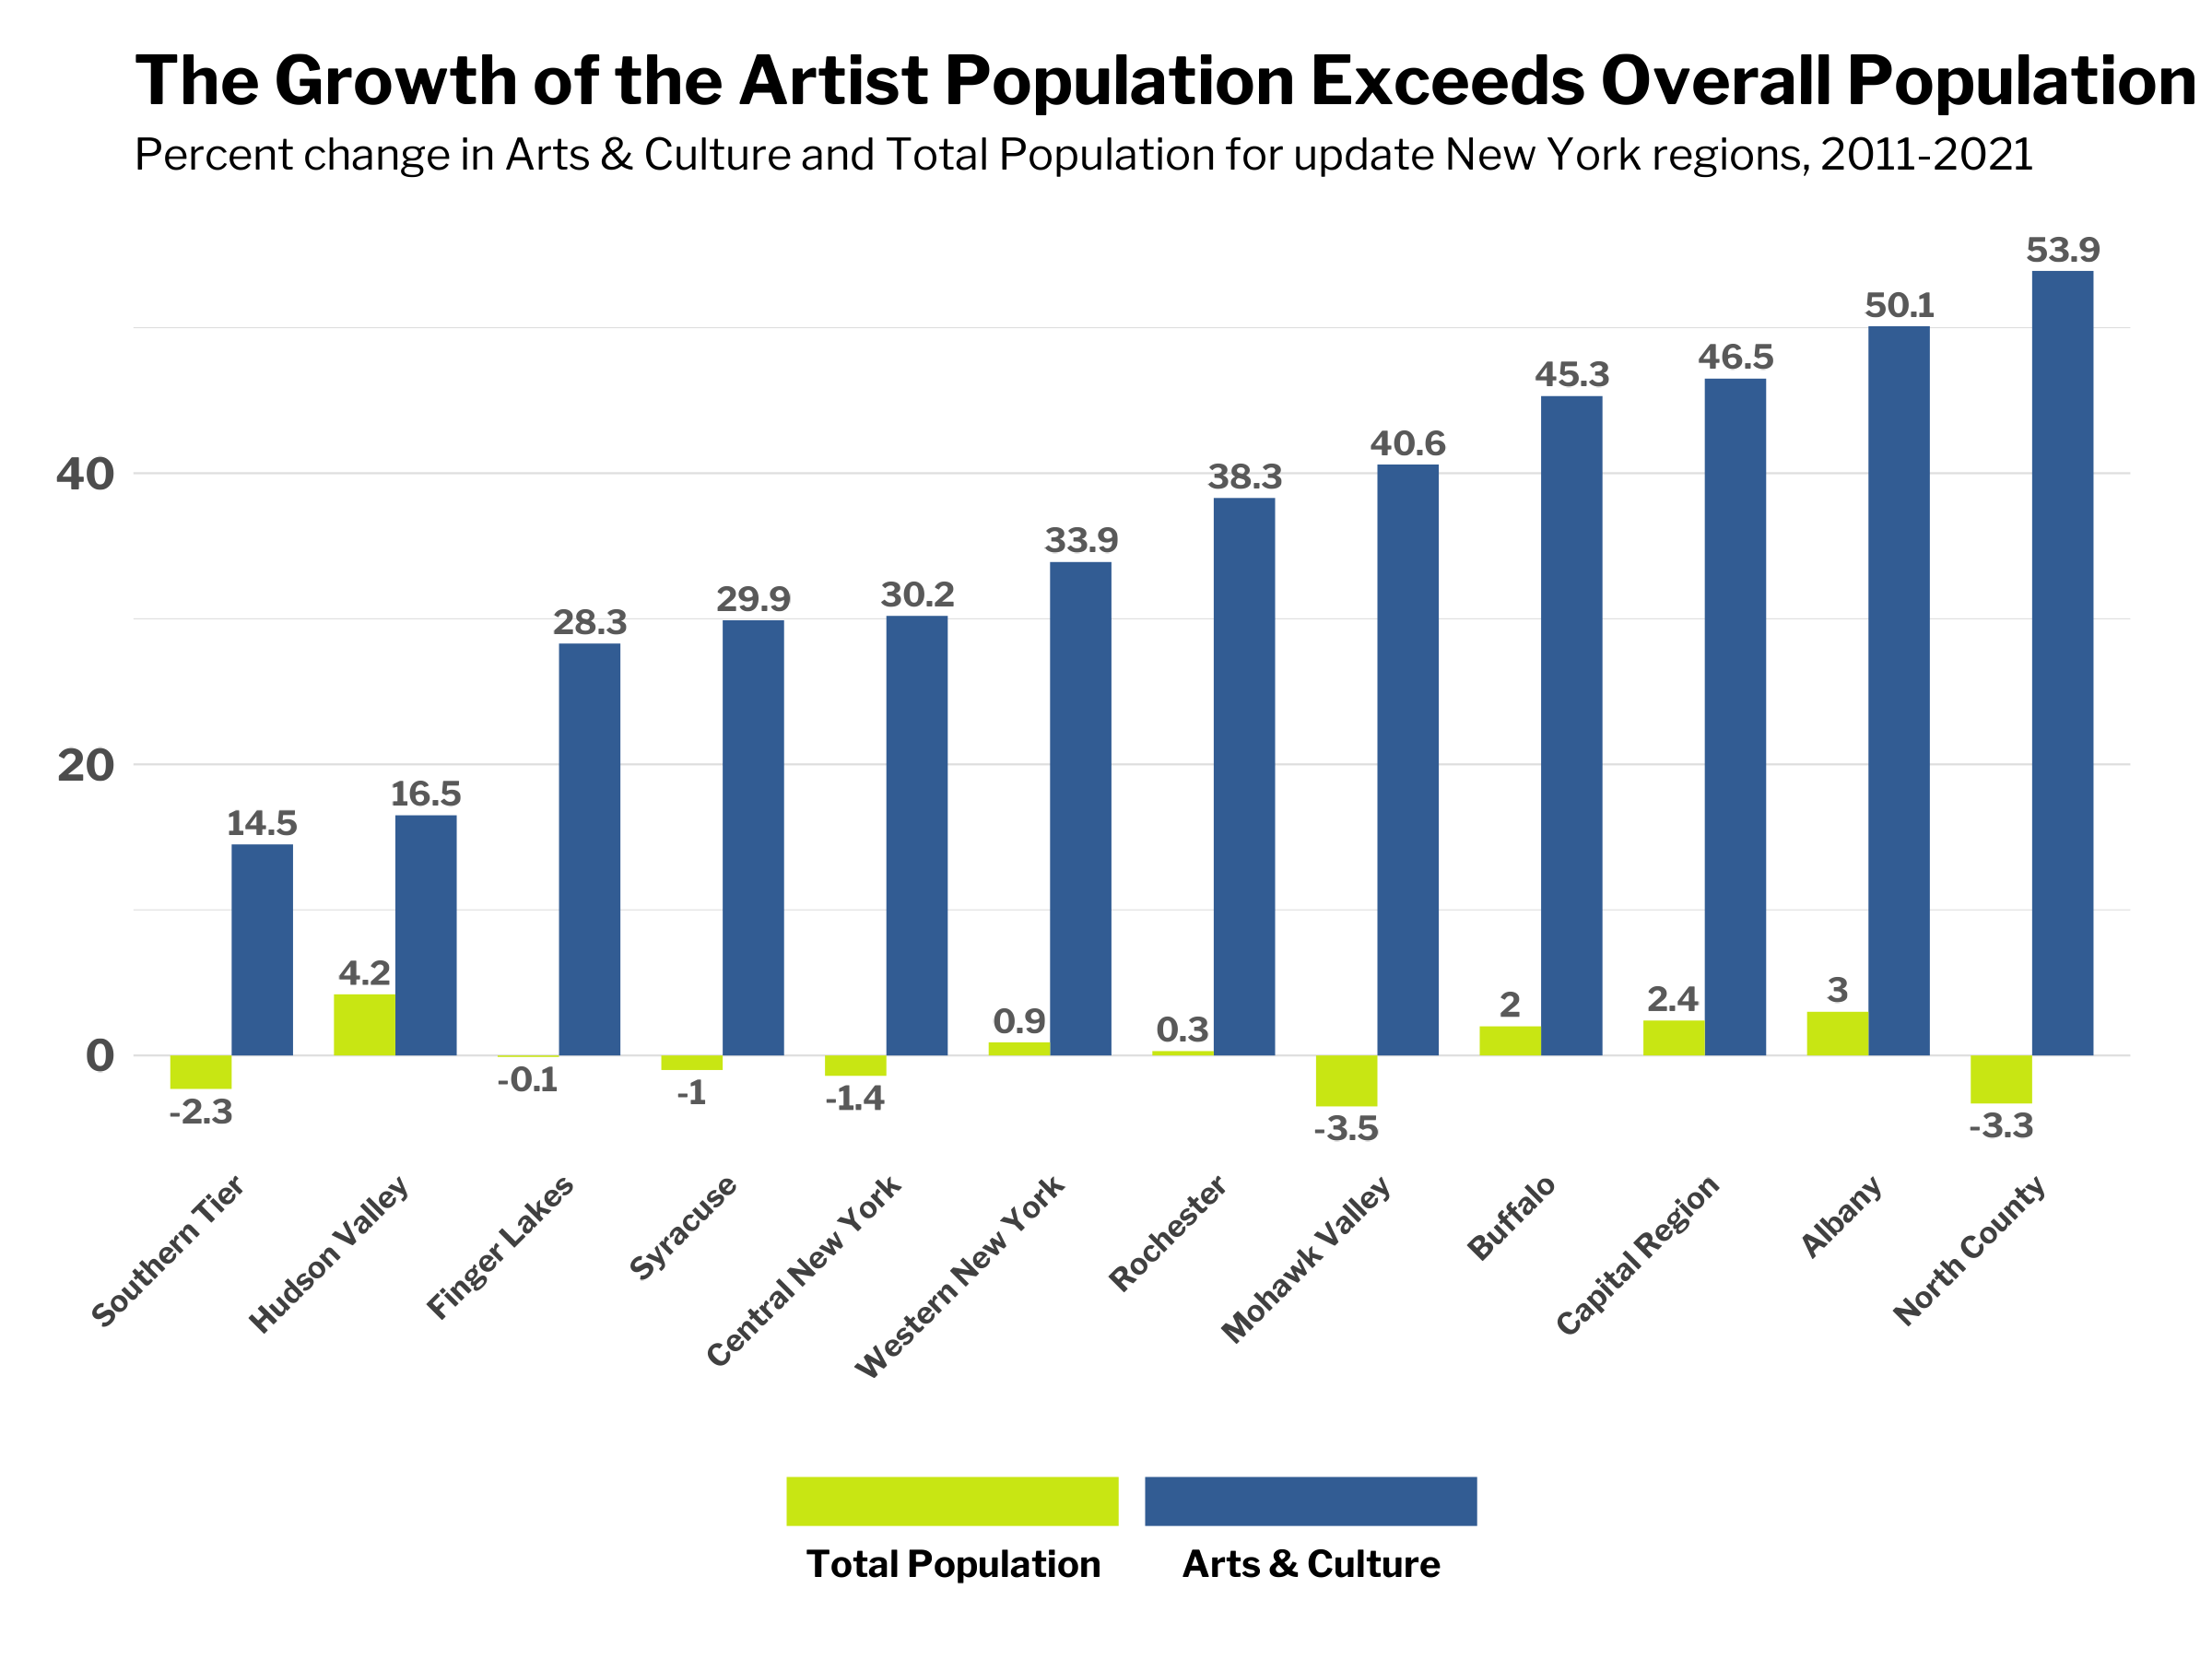 A bar graph titled, The Growth of the Artist Population Exceeds Overall Population. The subtitle reads, Percent change in Arts & Culture and Total Population for upstate New York regions, 2011-2021. The bar graph shows while the total population in upstate regions saw very little increase or even decreases, the artist population saw massive gains anywhere from 14.5 to 53.9 percent.